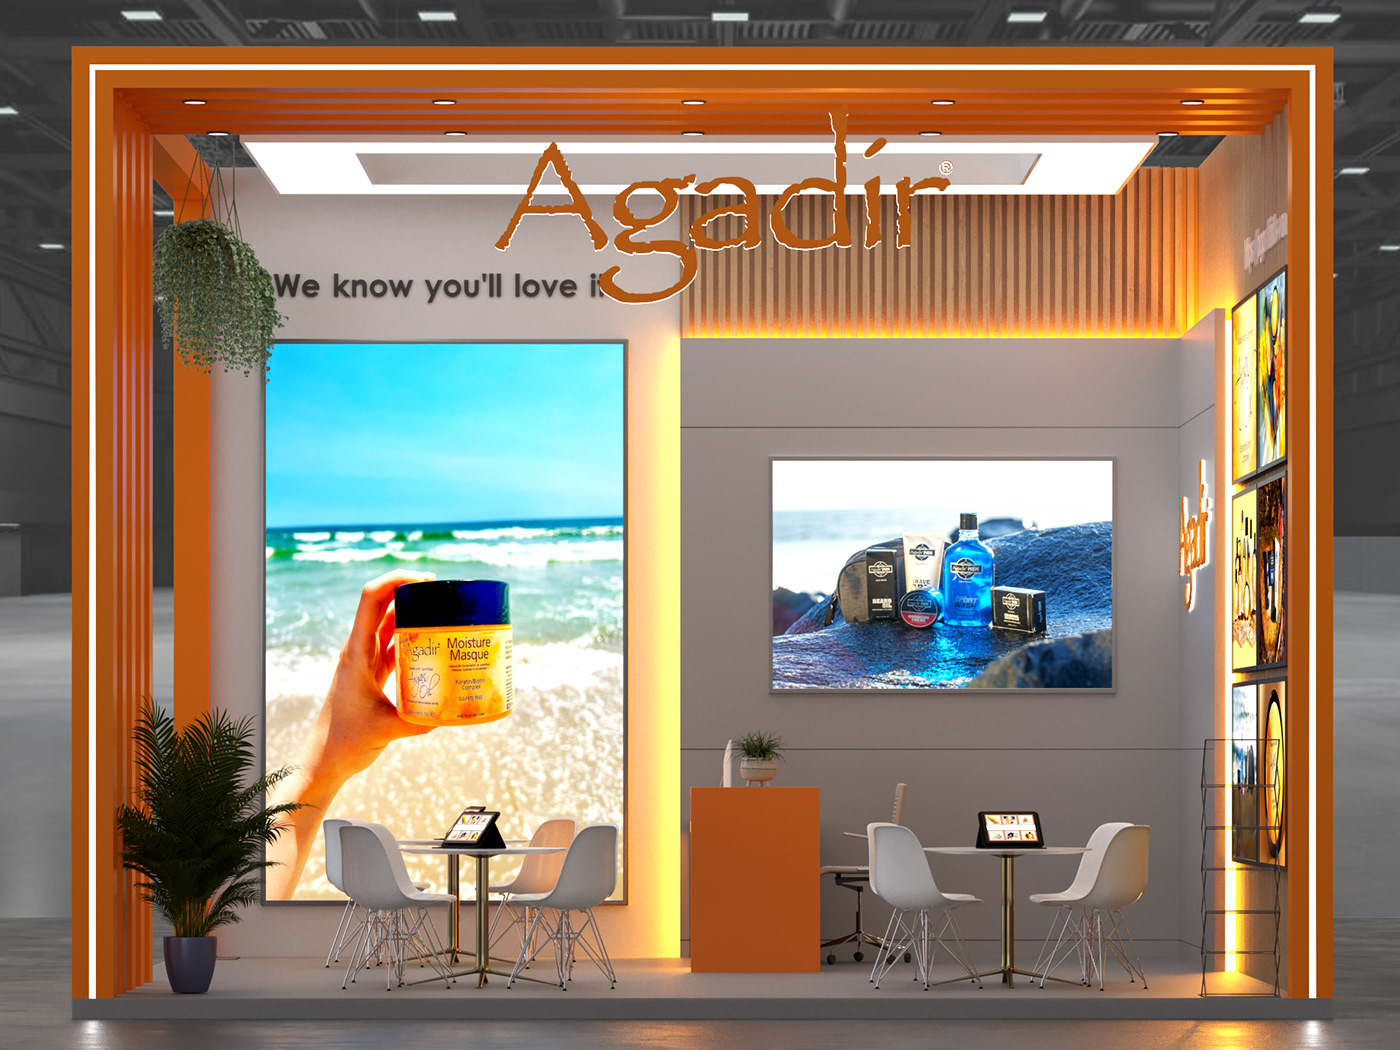 Exhibition Design  Experiential design Trade Show Design Spatial Design Brand activation booth design Visitor Engagement environmental graphics immersive environments interactive displays